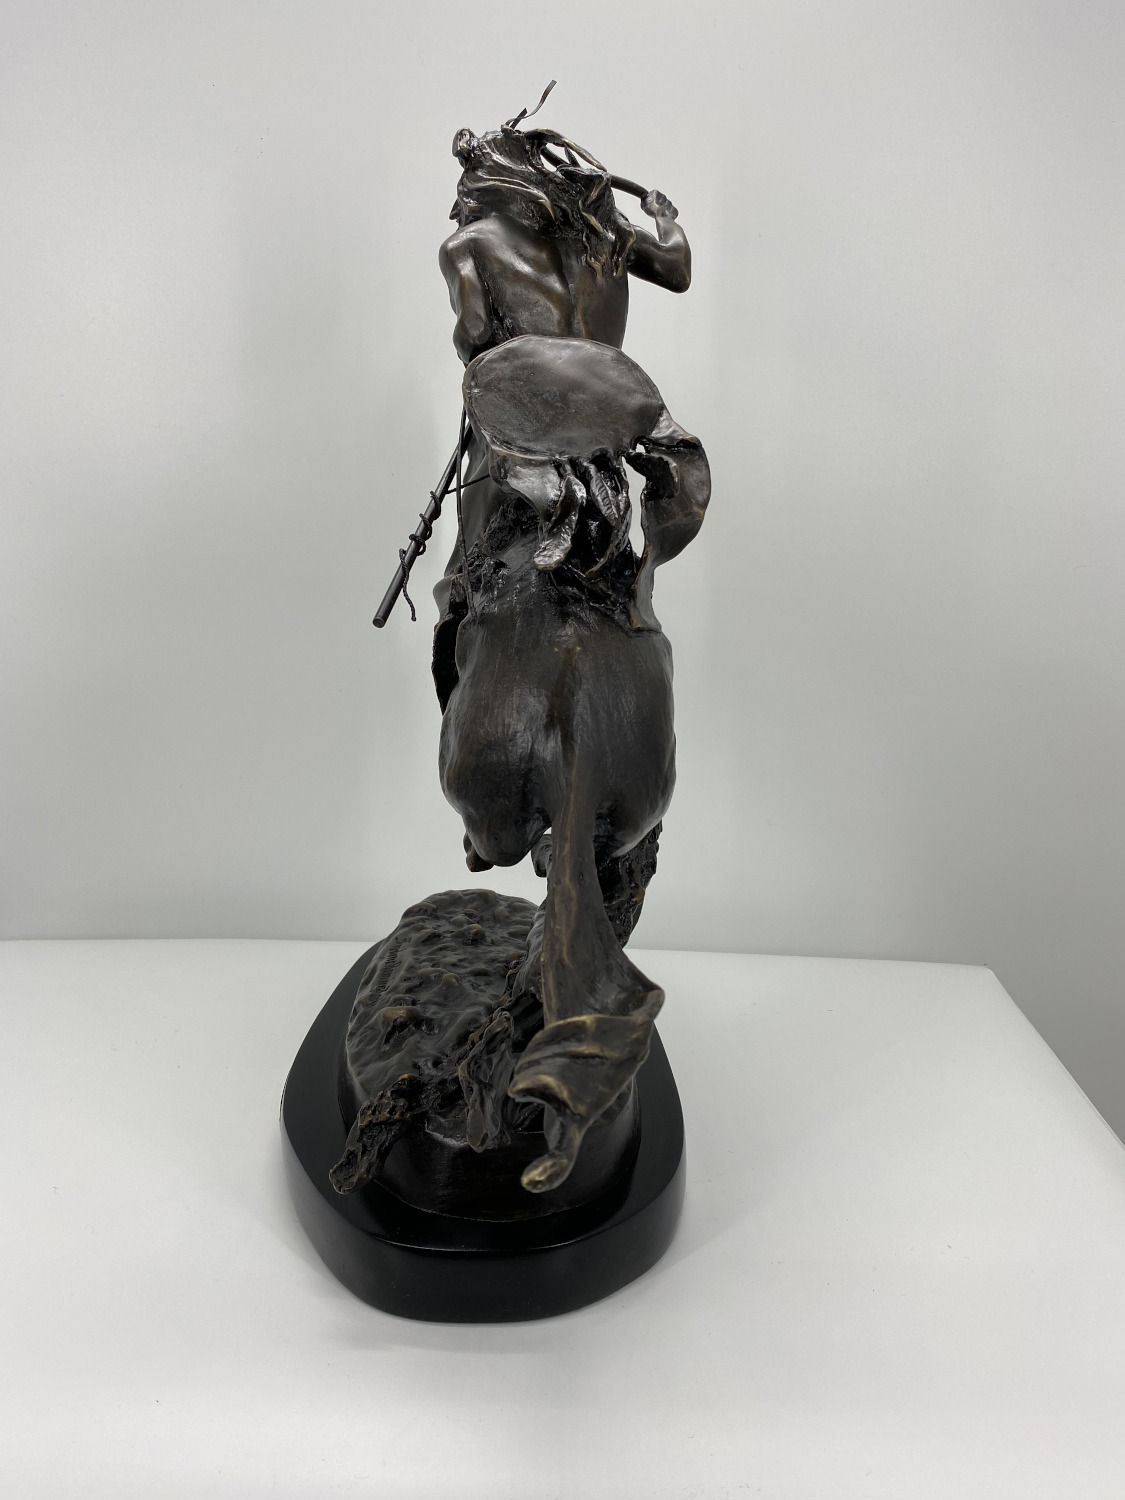 Frederic Remington Solid American Bronze Statue "Cheyenne" baby size 8"H x 8"L x 3.5"W - image 5 of 6